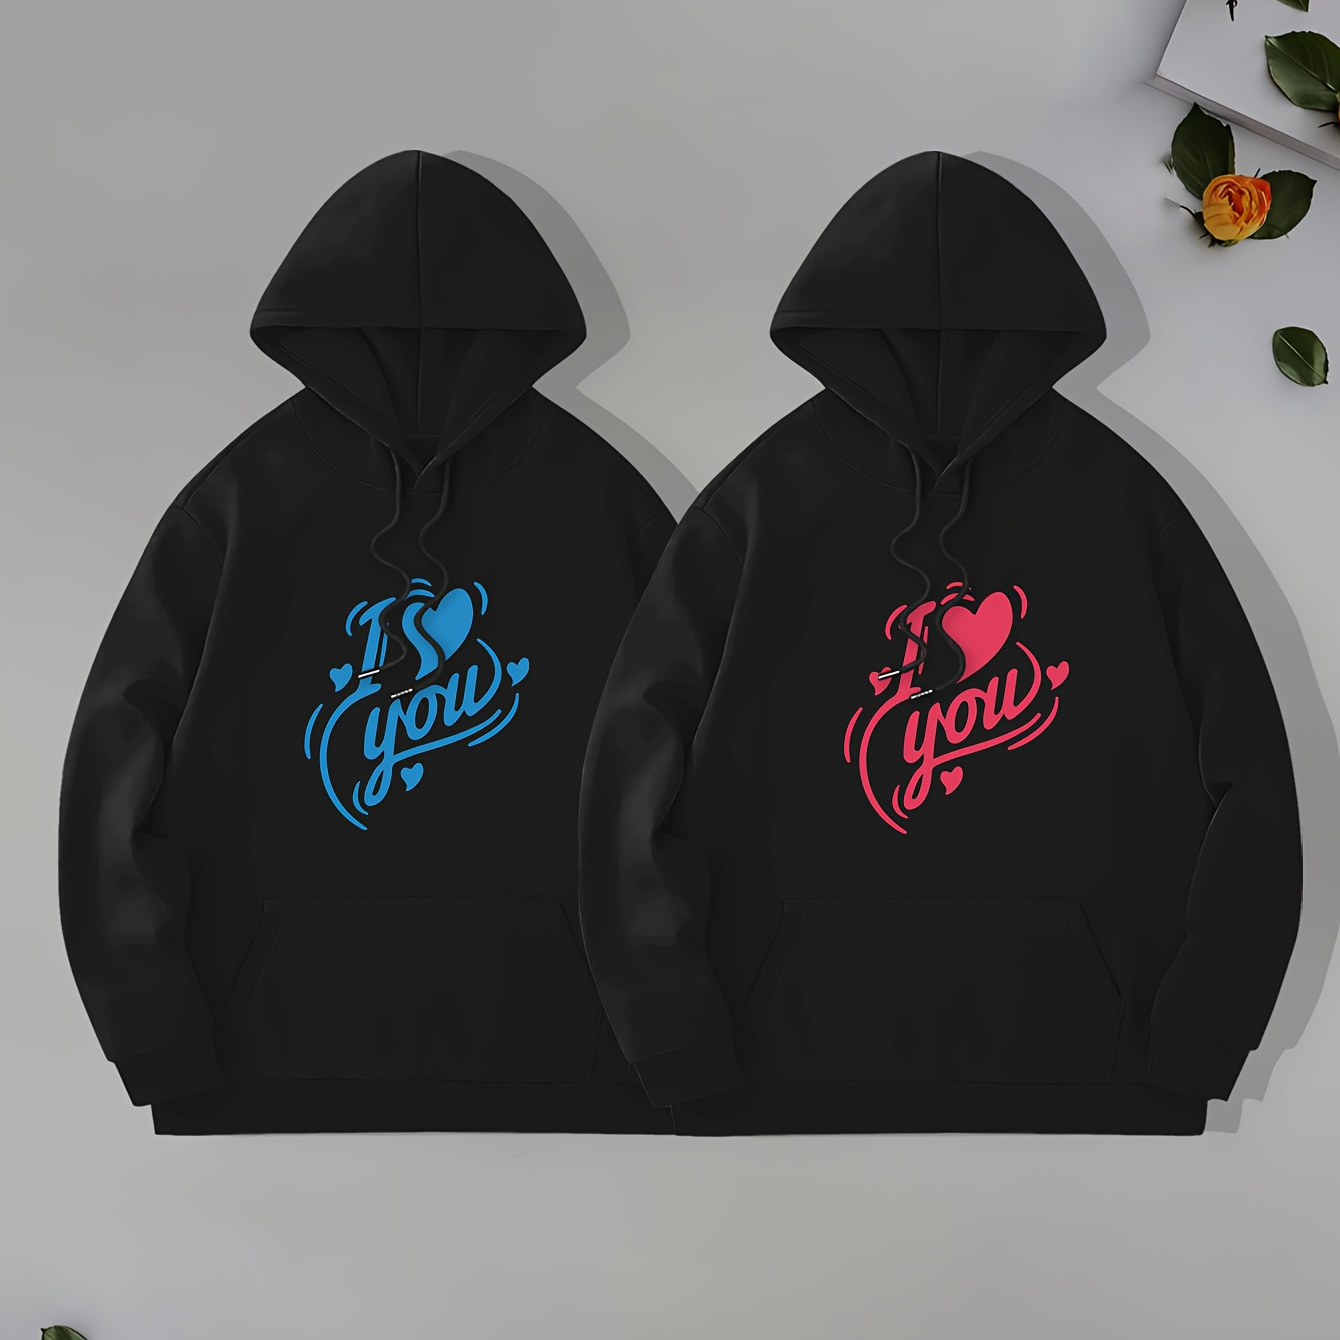 

I Love You Lover's Print Men's Pullover Round Neck Hoodies With Kangaroo Pocket Long Sleeve Hooded Sweatshirt Loose Casual Top For Autumn Winter Men's Clothing As Gifts